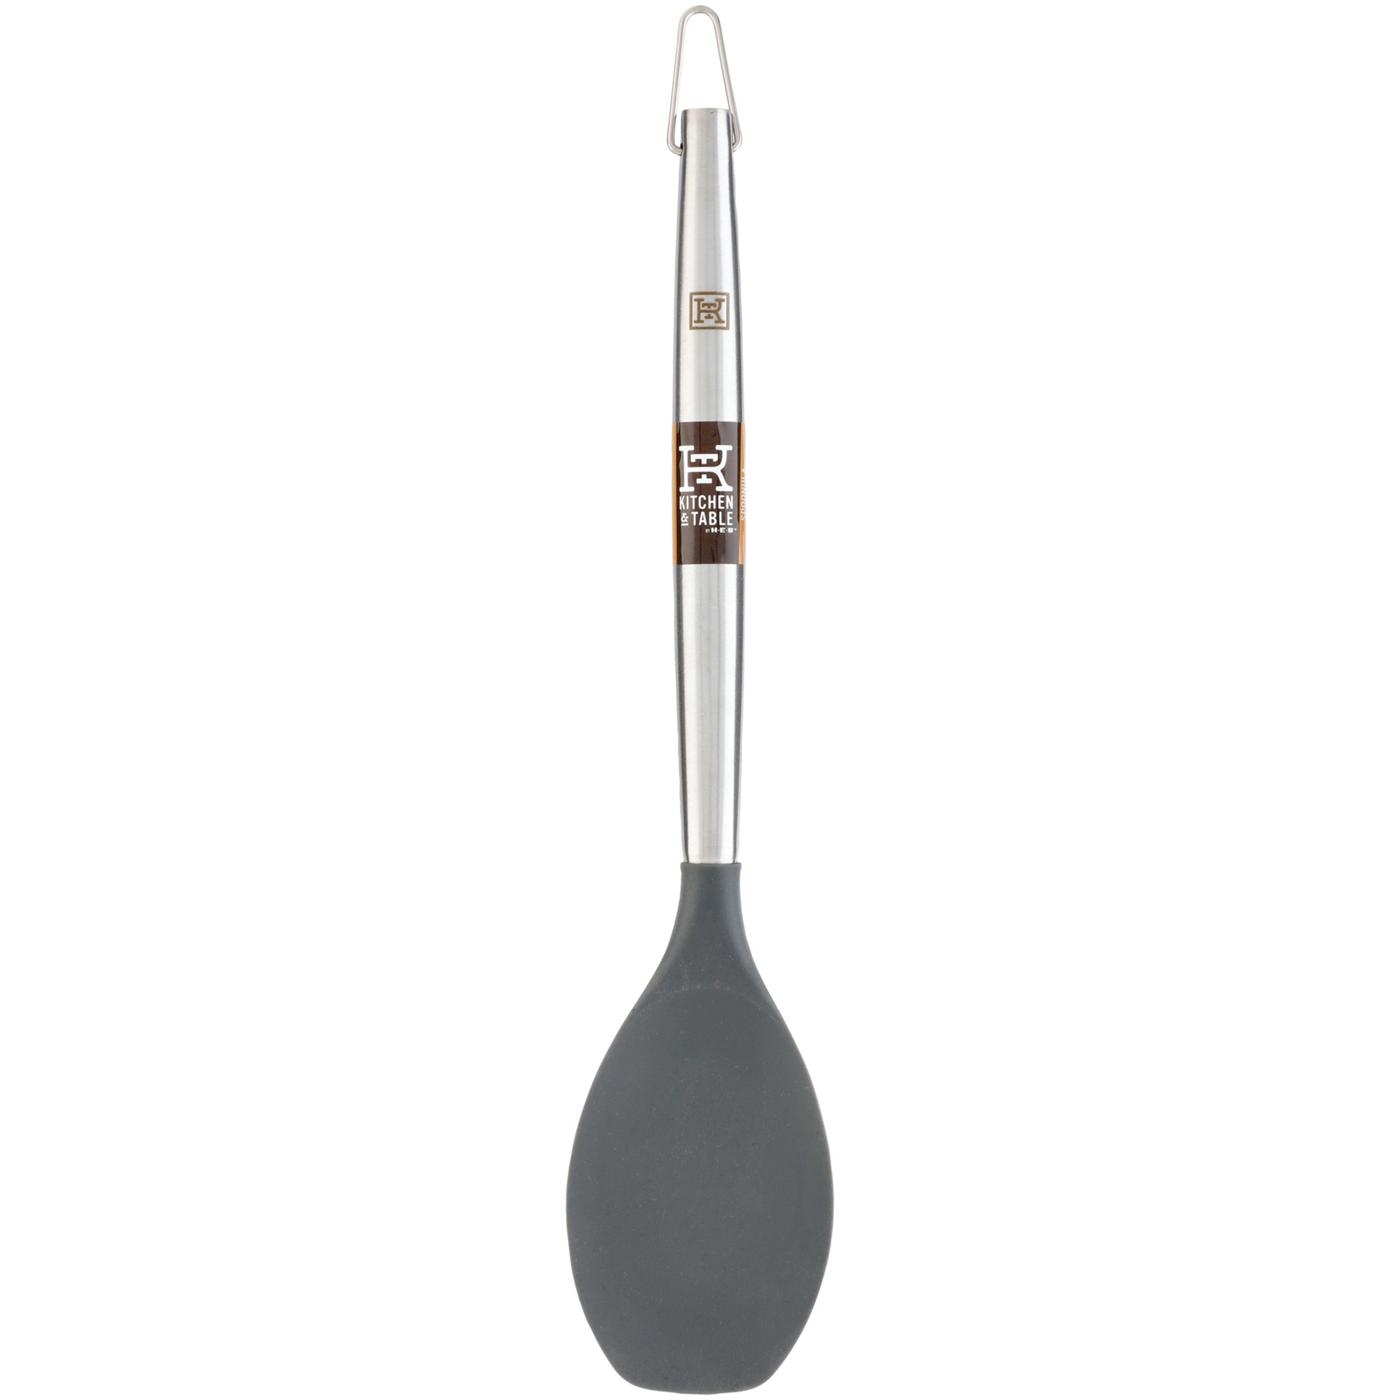 Kitchen & Table by H-E-B Silicone Spoon - Shop Utensils & Gadgets at H-E-B